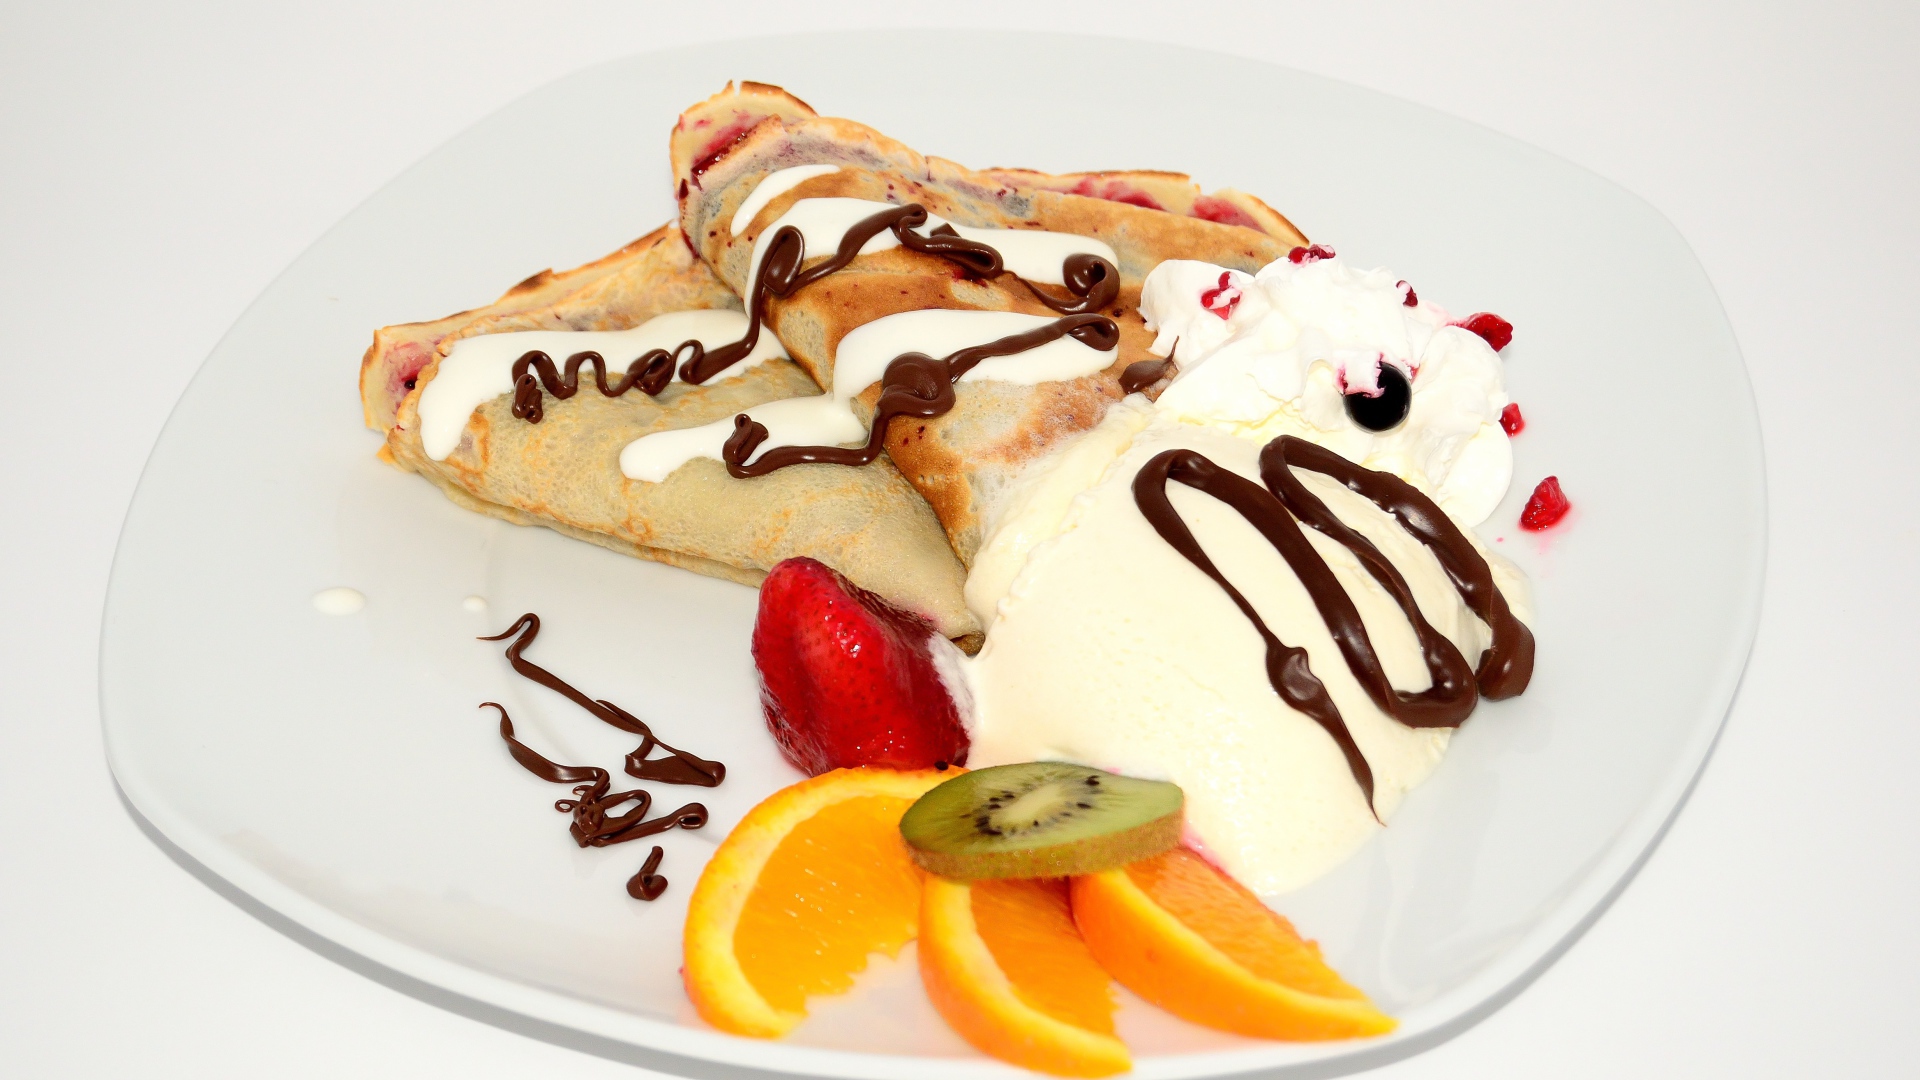 Thin pancakes with sour cream and fruit for Maslenitsa